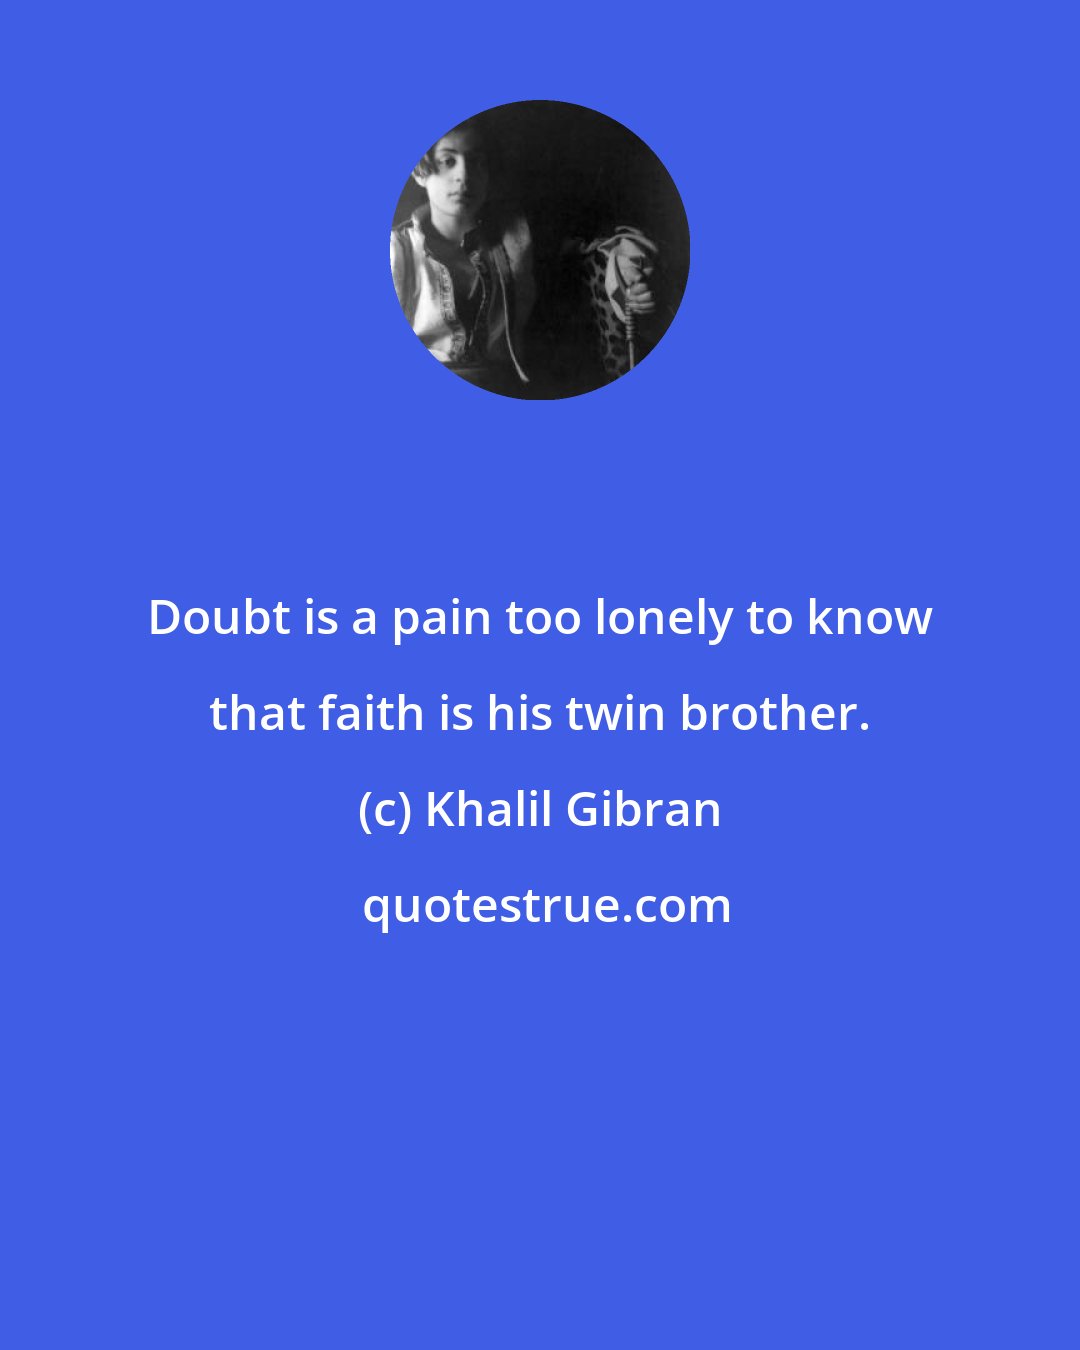 Khalil Gibran: Doubt is a pain too lonely to know that faith is his twin brother.